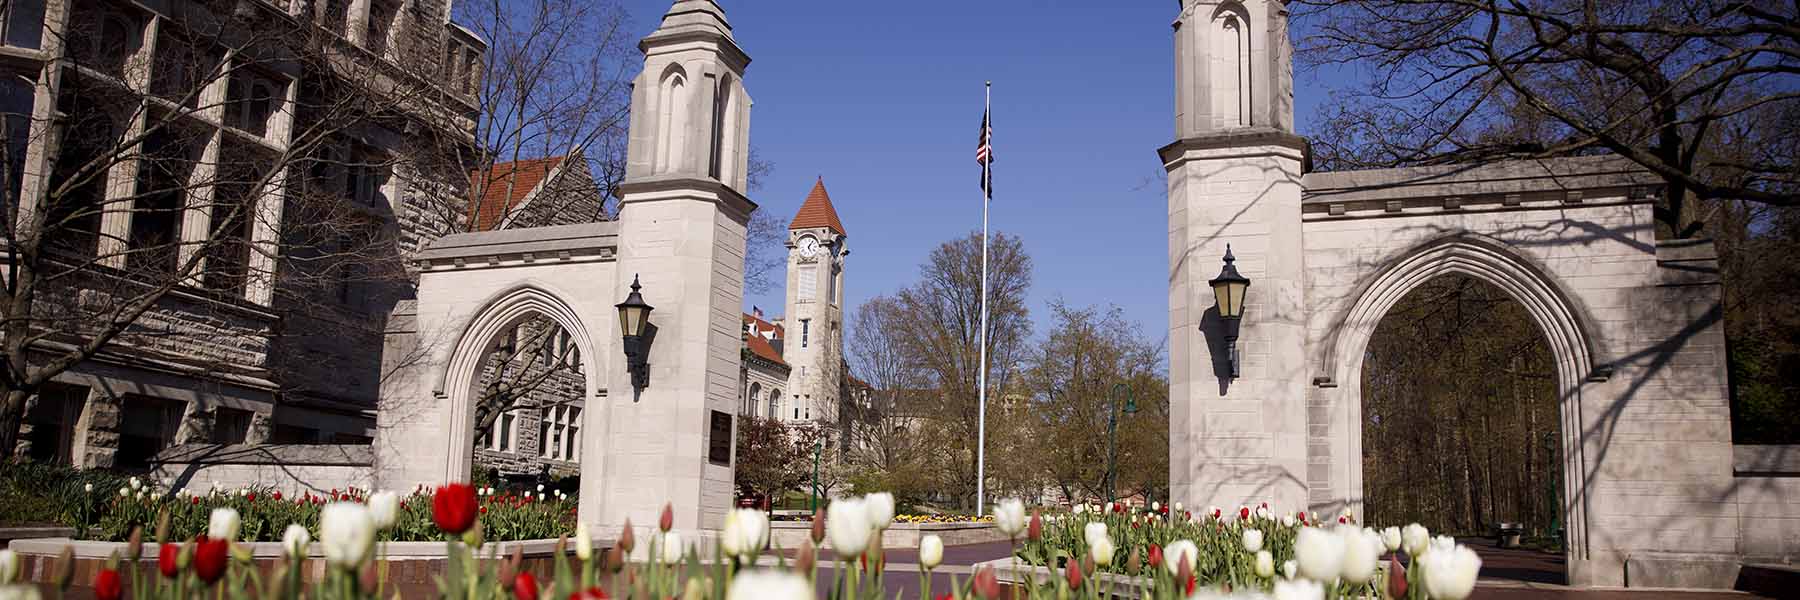 IU's iconic Sample Gates in spring time with red and white tulips.